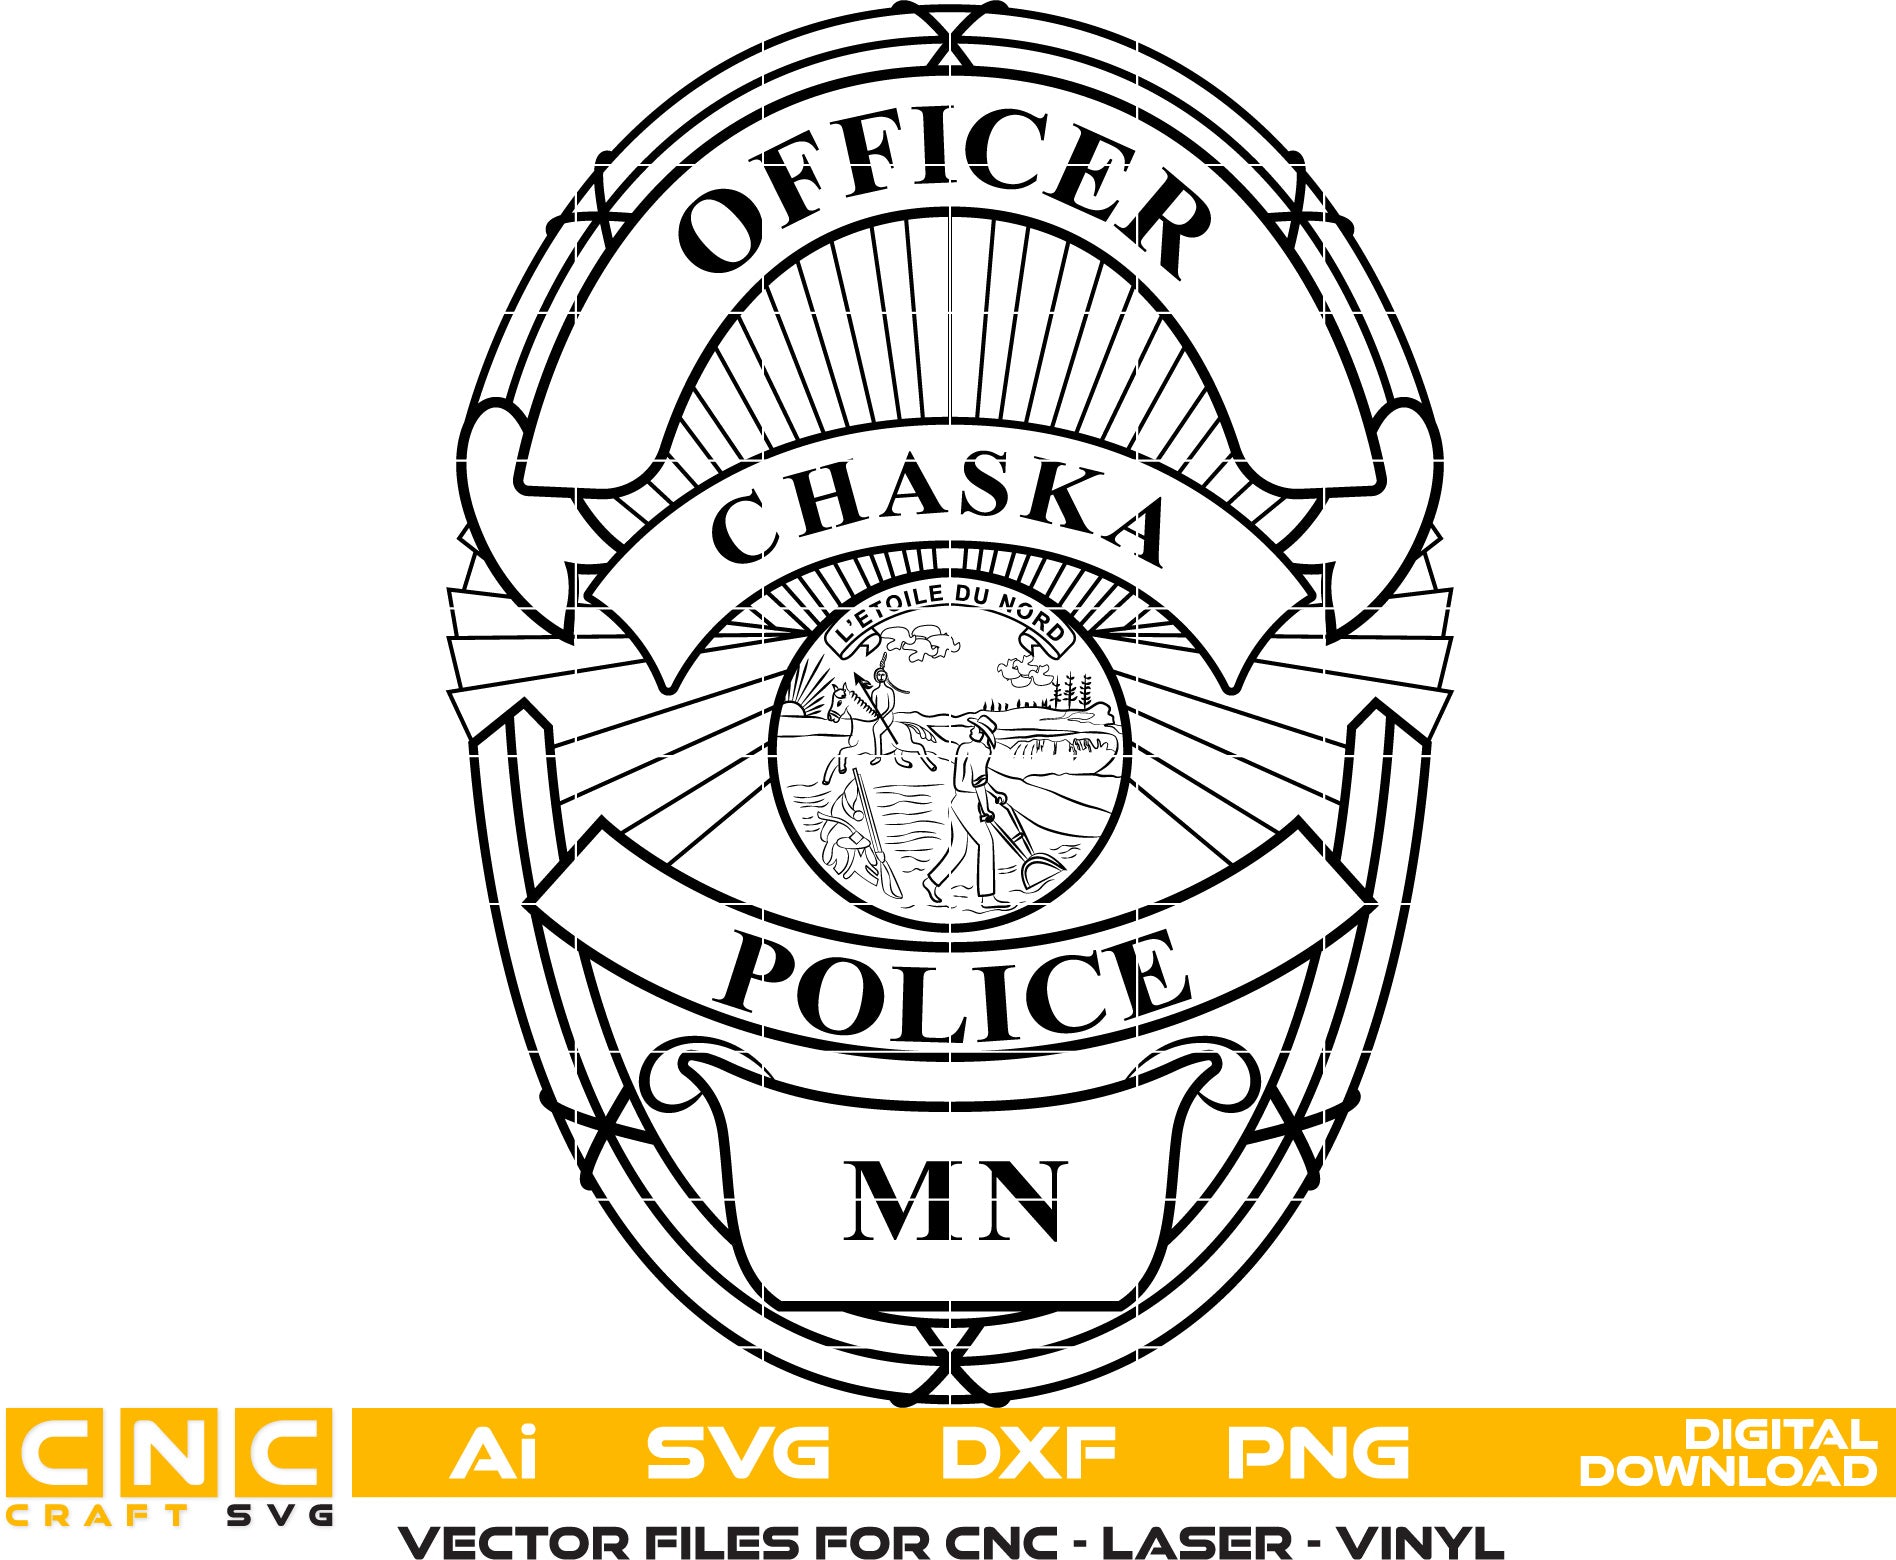 State of Minesota Chaska Police Officer Badge Vector Art, Ai,SVG, DXF, PNG, Digital Files for Laser Engraving, Woodworking, Printing, CNC Router, Cricut, Ezecad etc.  &nbsp;